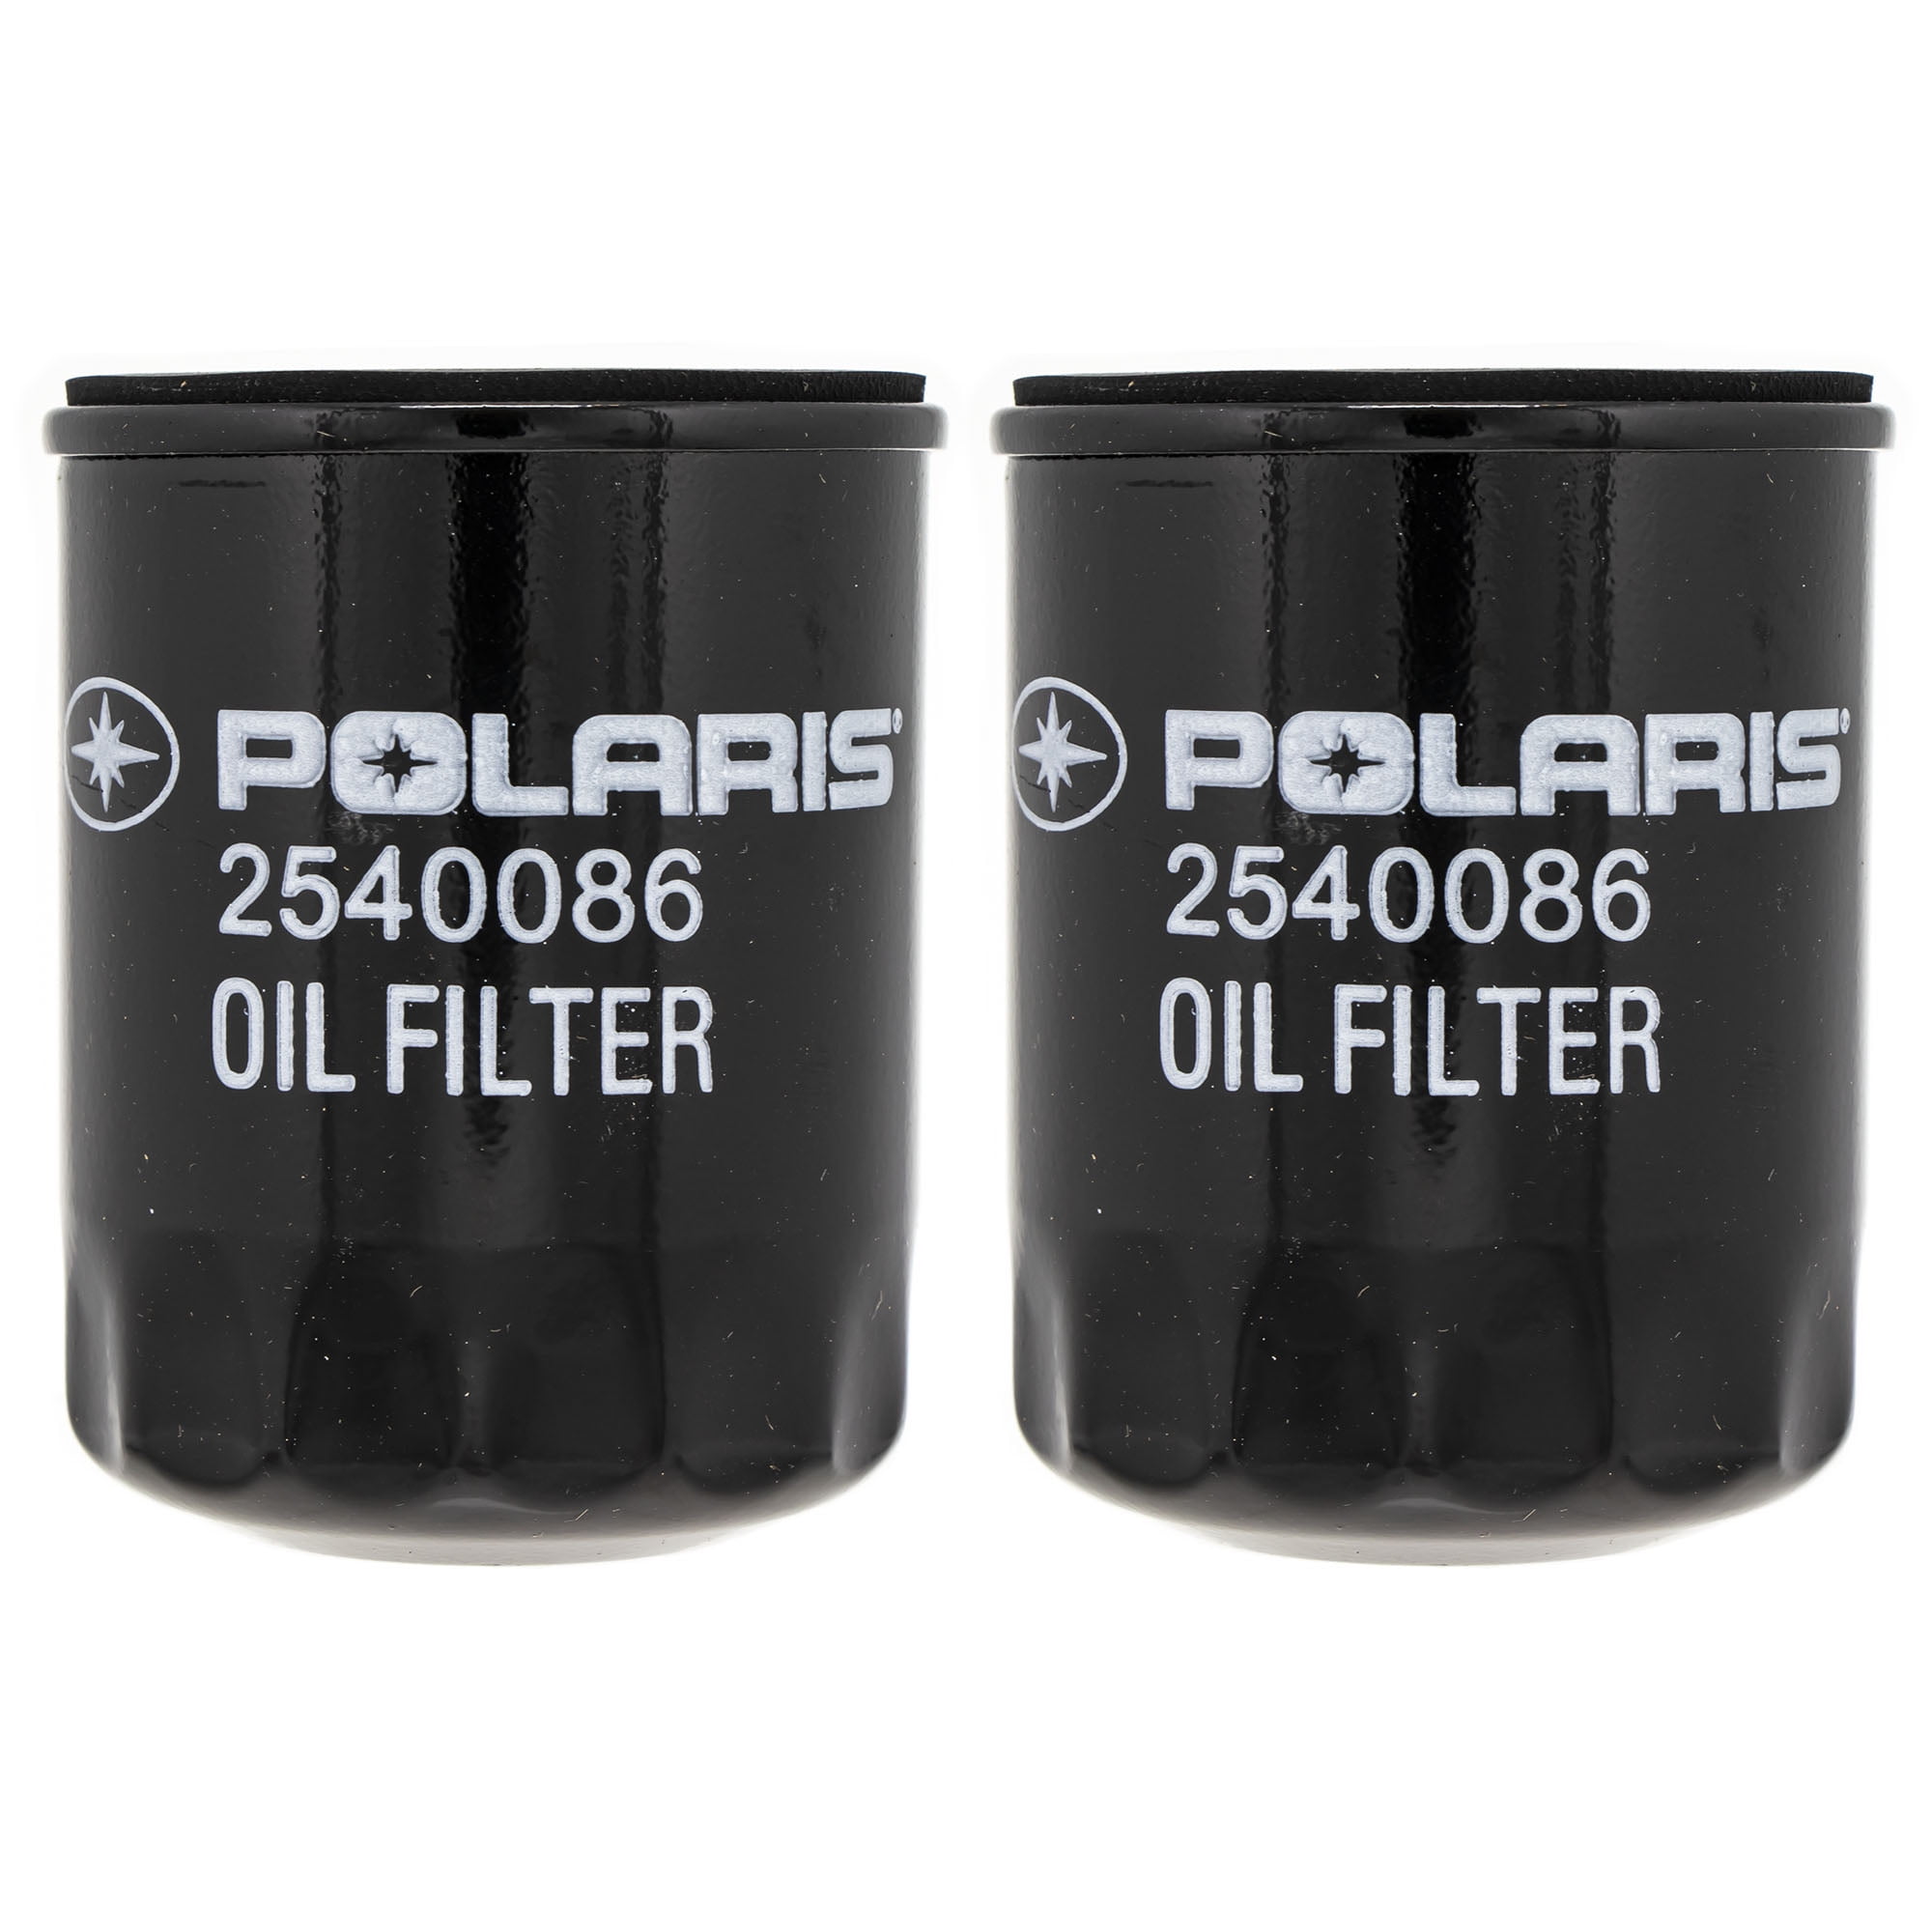 2540086 Oil Filter Replacement for 2004-2018 Polaris RZR Ranger 570-1000 General 1000 ACE 900 ATV/Snowmobile # 2540122,2540006 